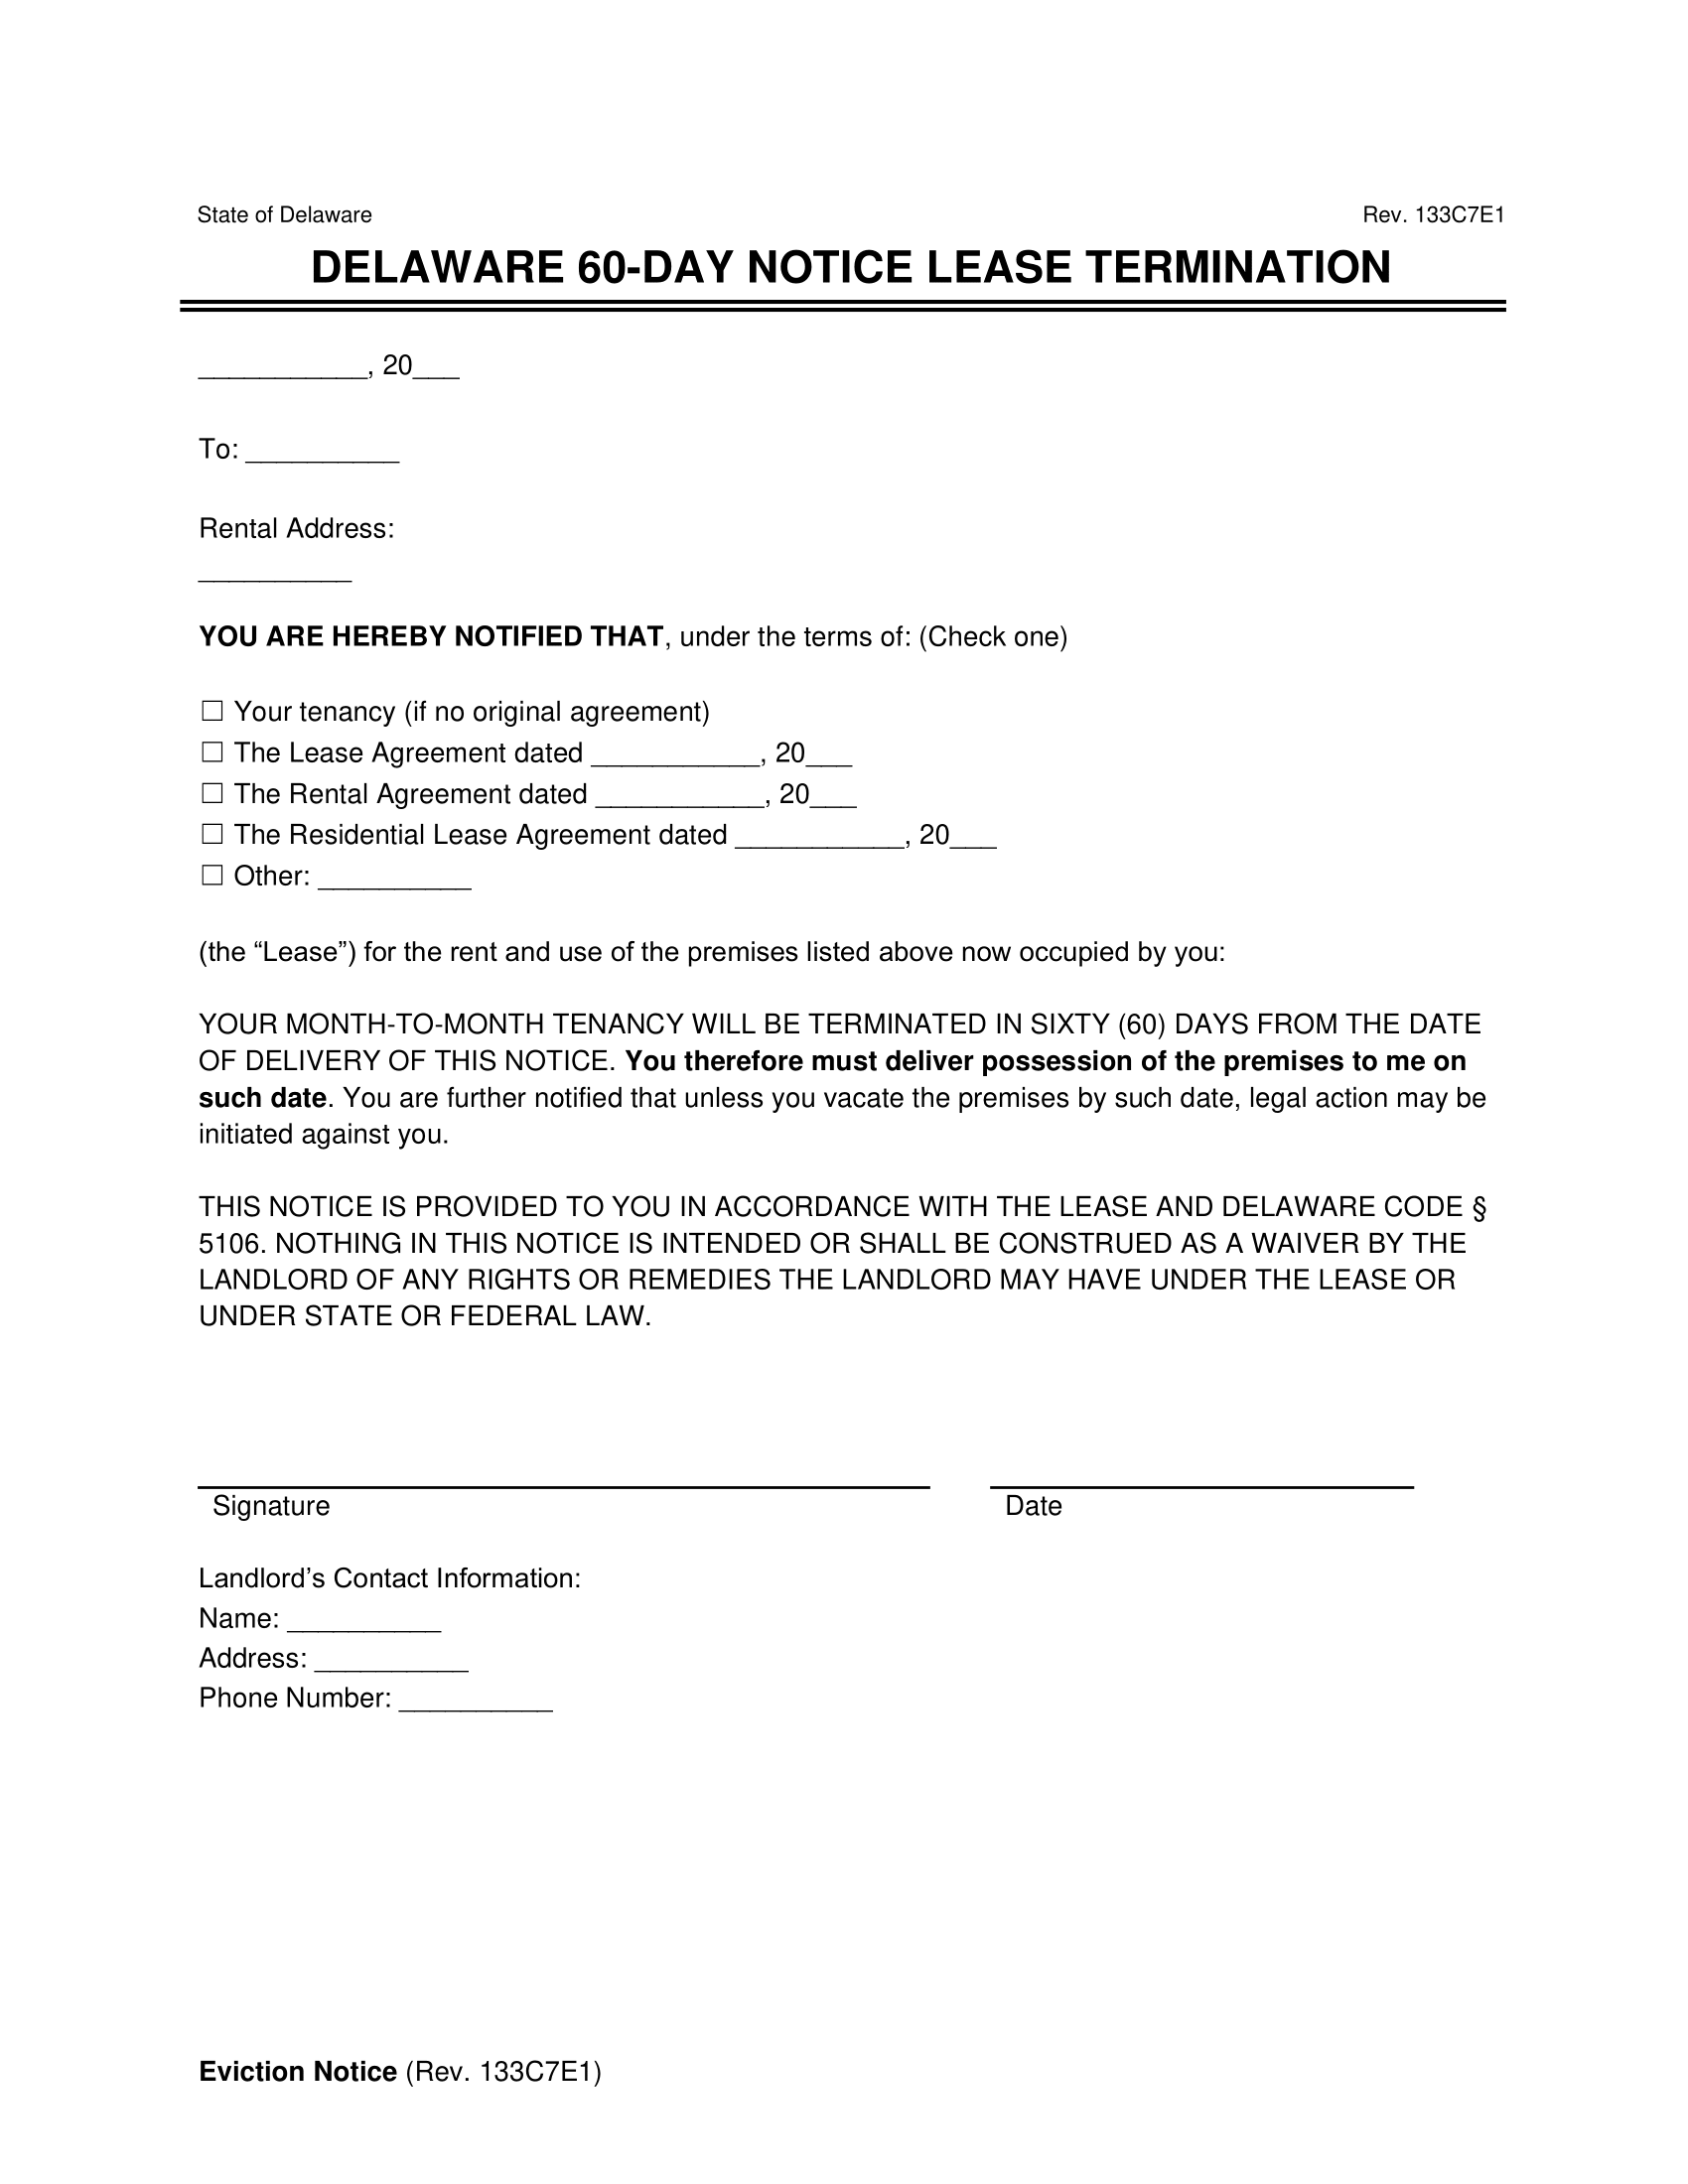 Delaware 60-Day Notice Lease Termination